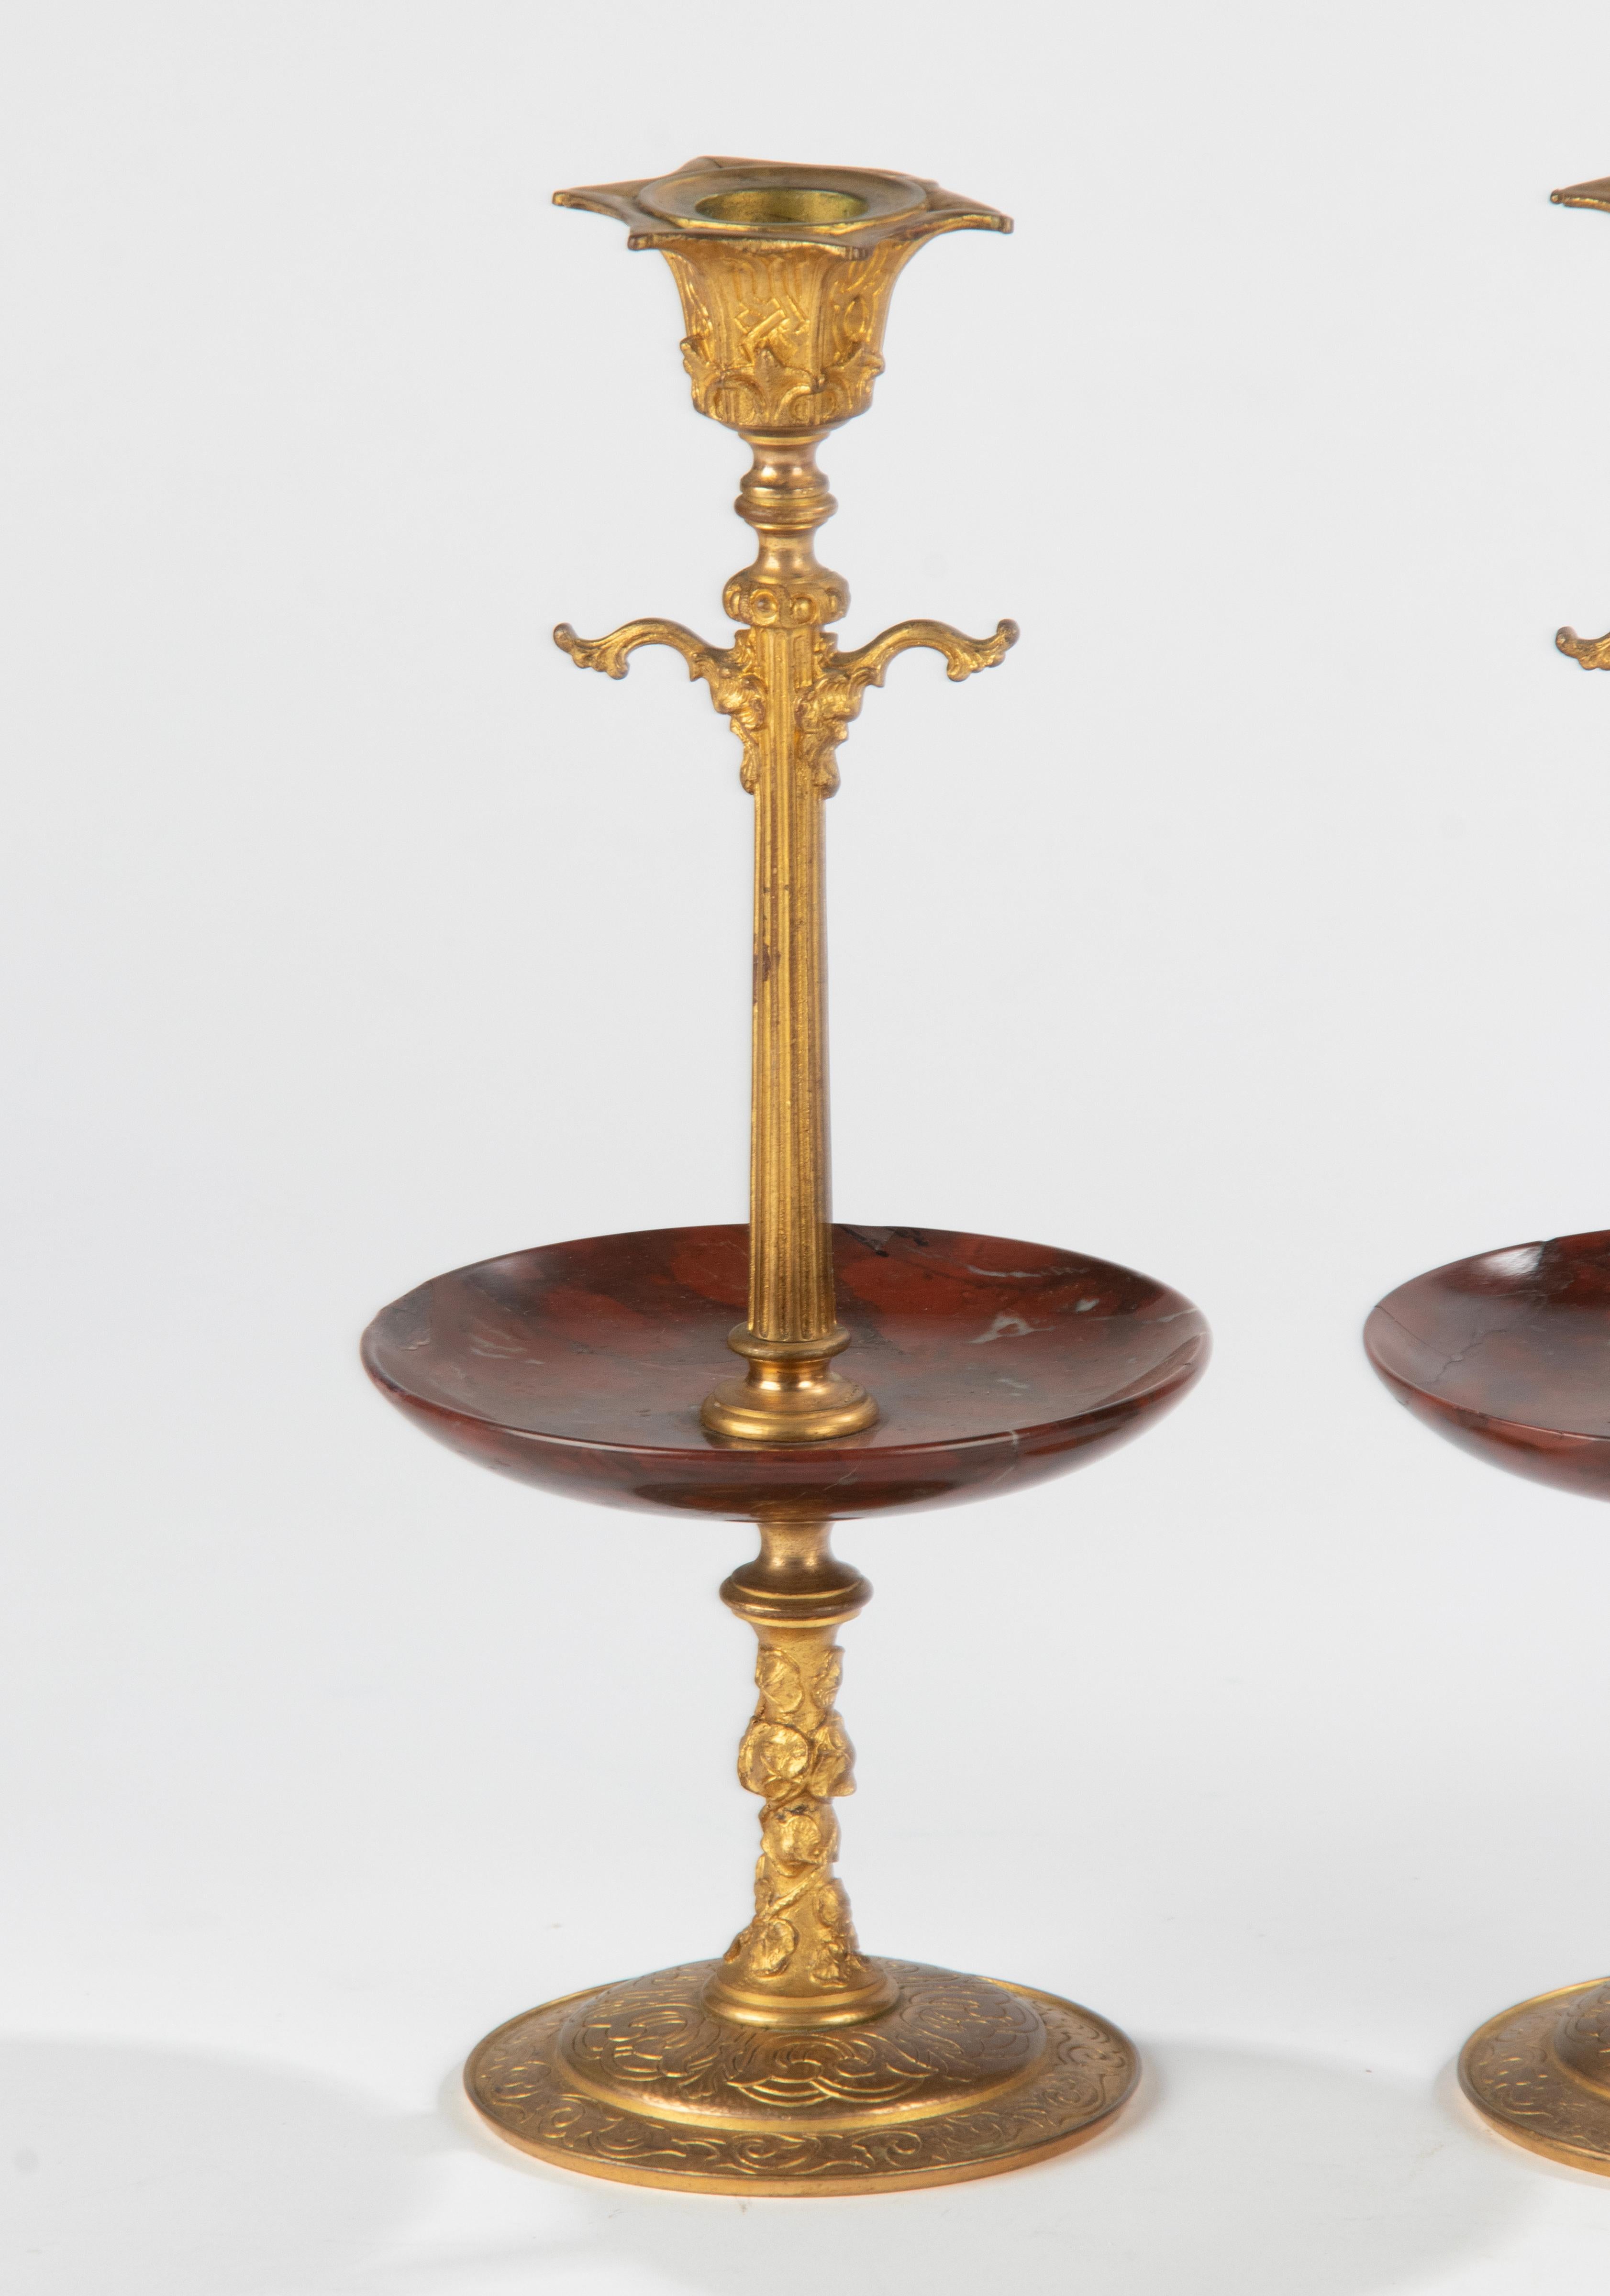 A pair of antique French candlesticks, made of gilded bronze. At the center a bowl made of red 